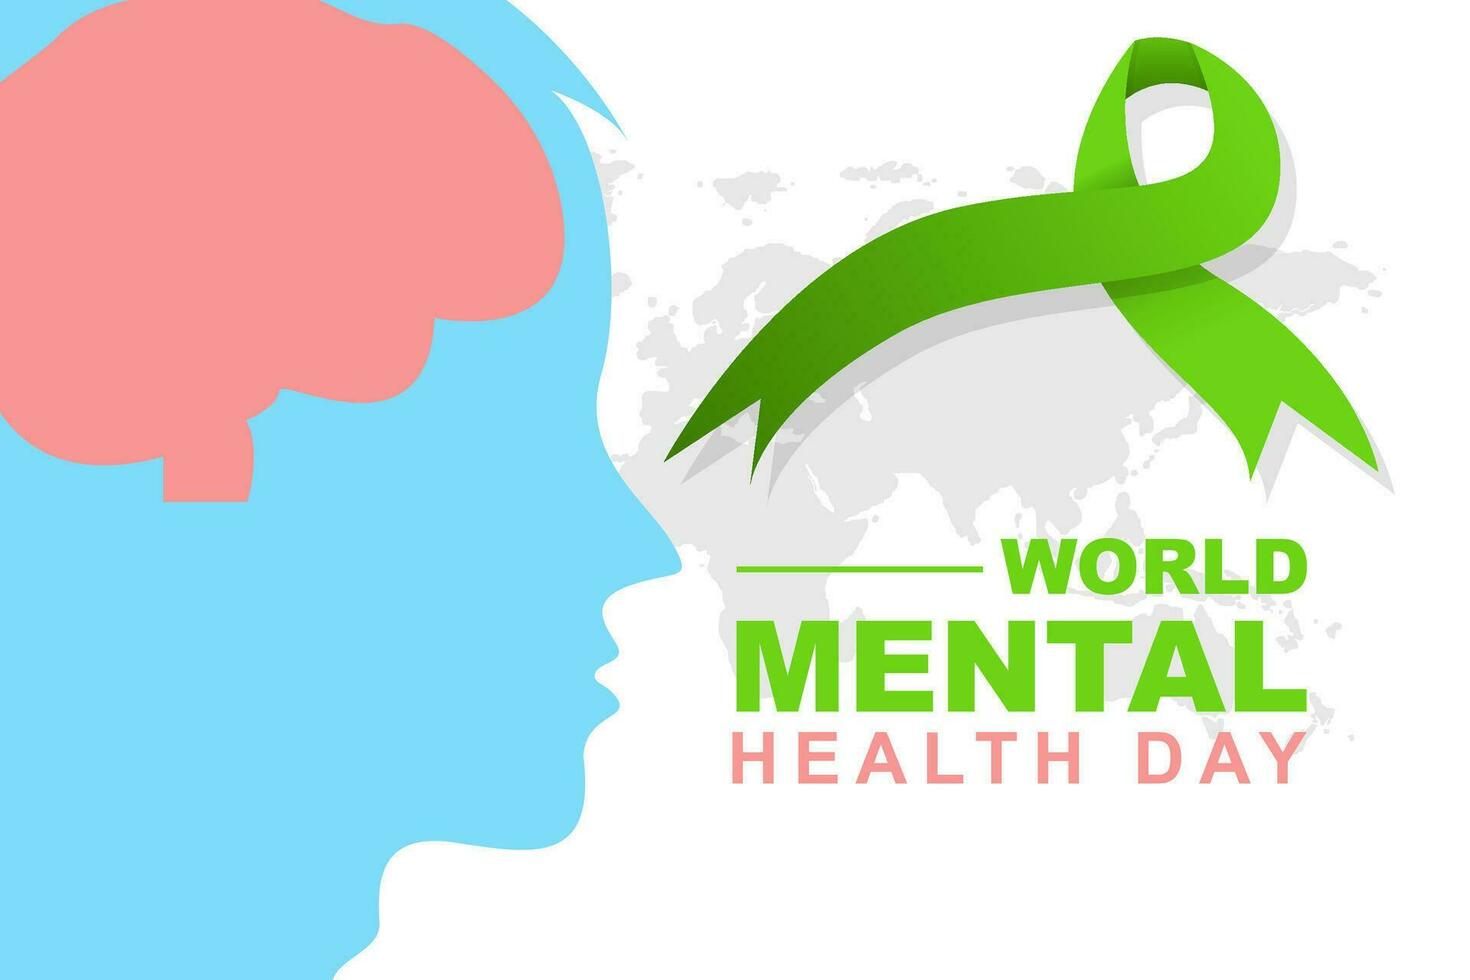 World Mental Health Day is celebrated every year on October 10. Vector illustration